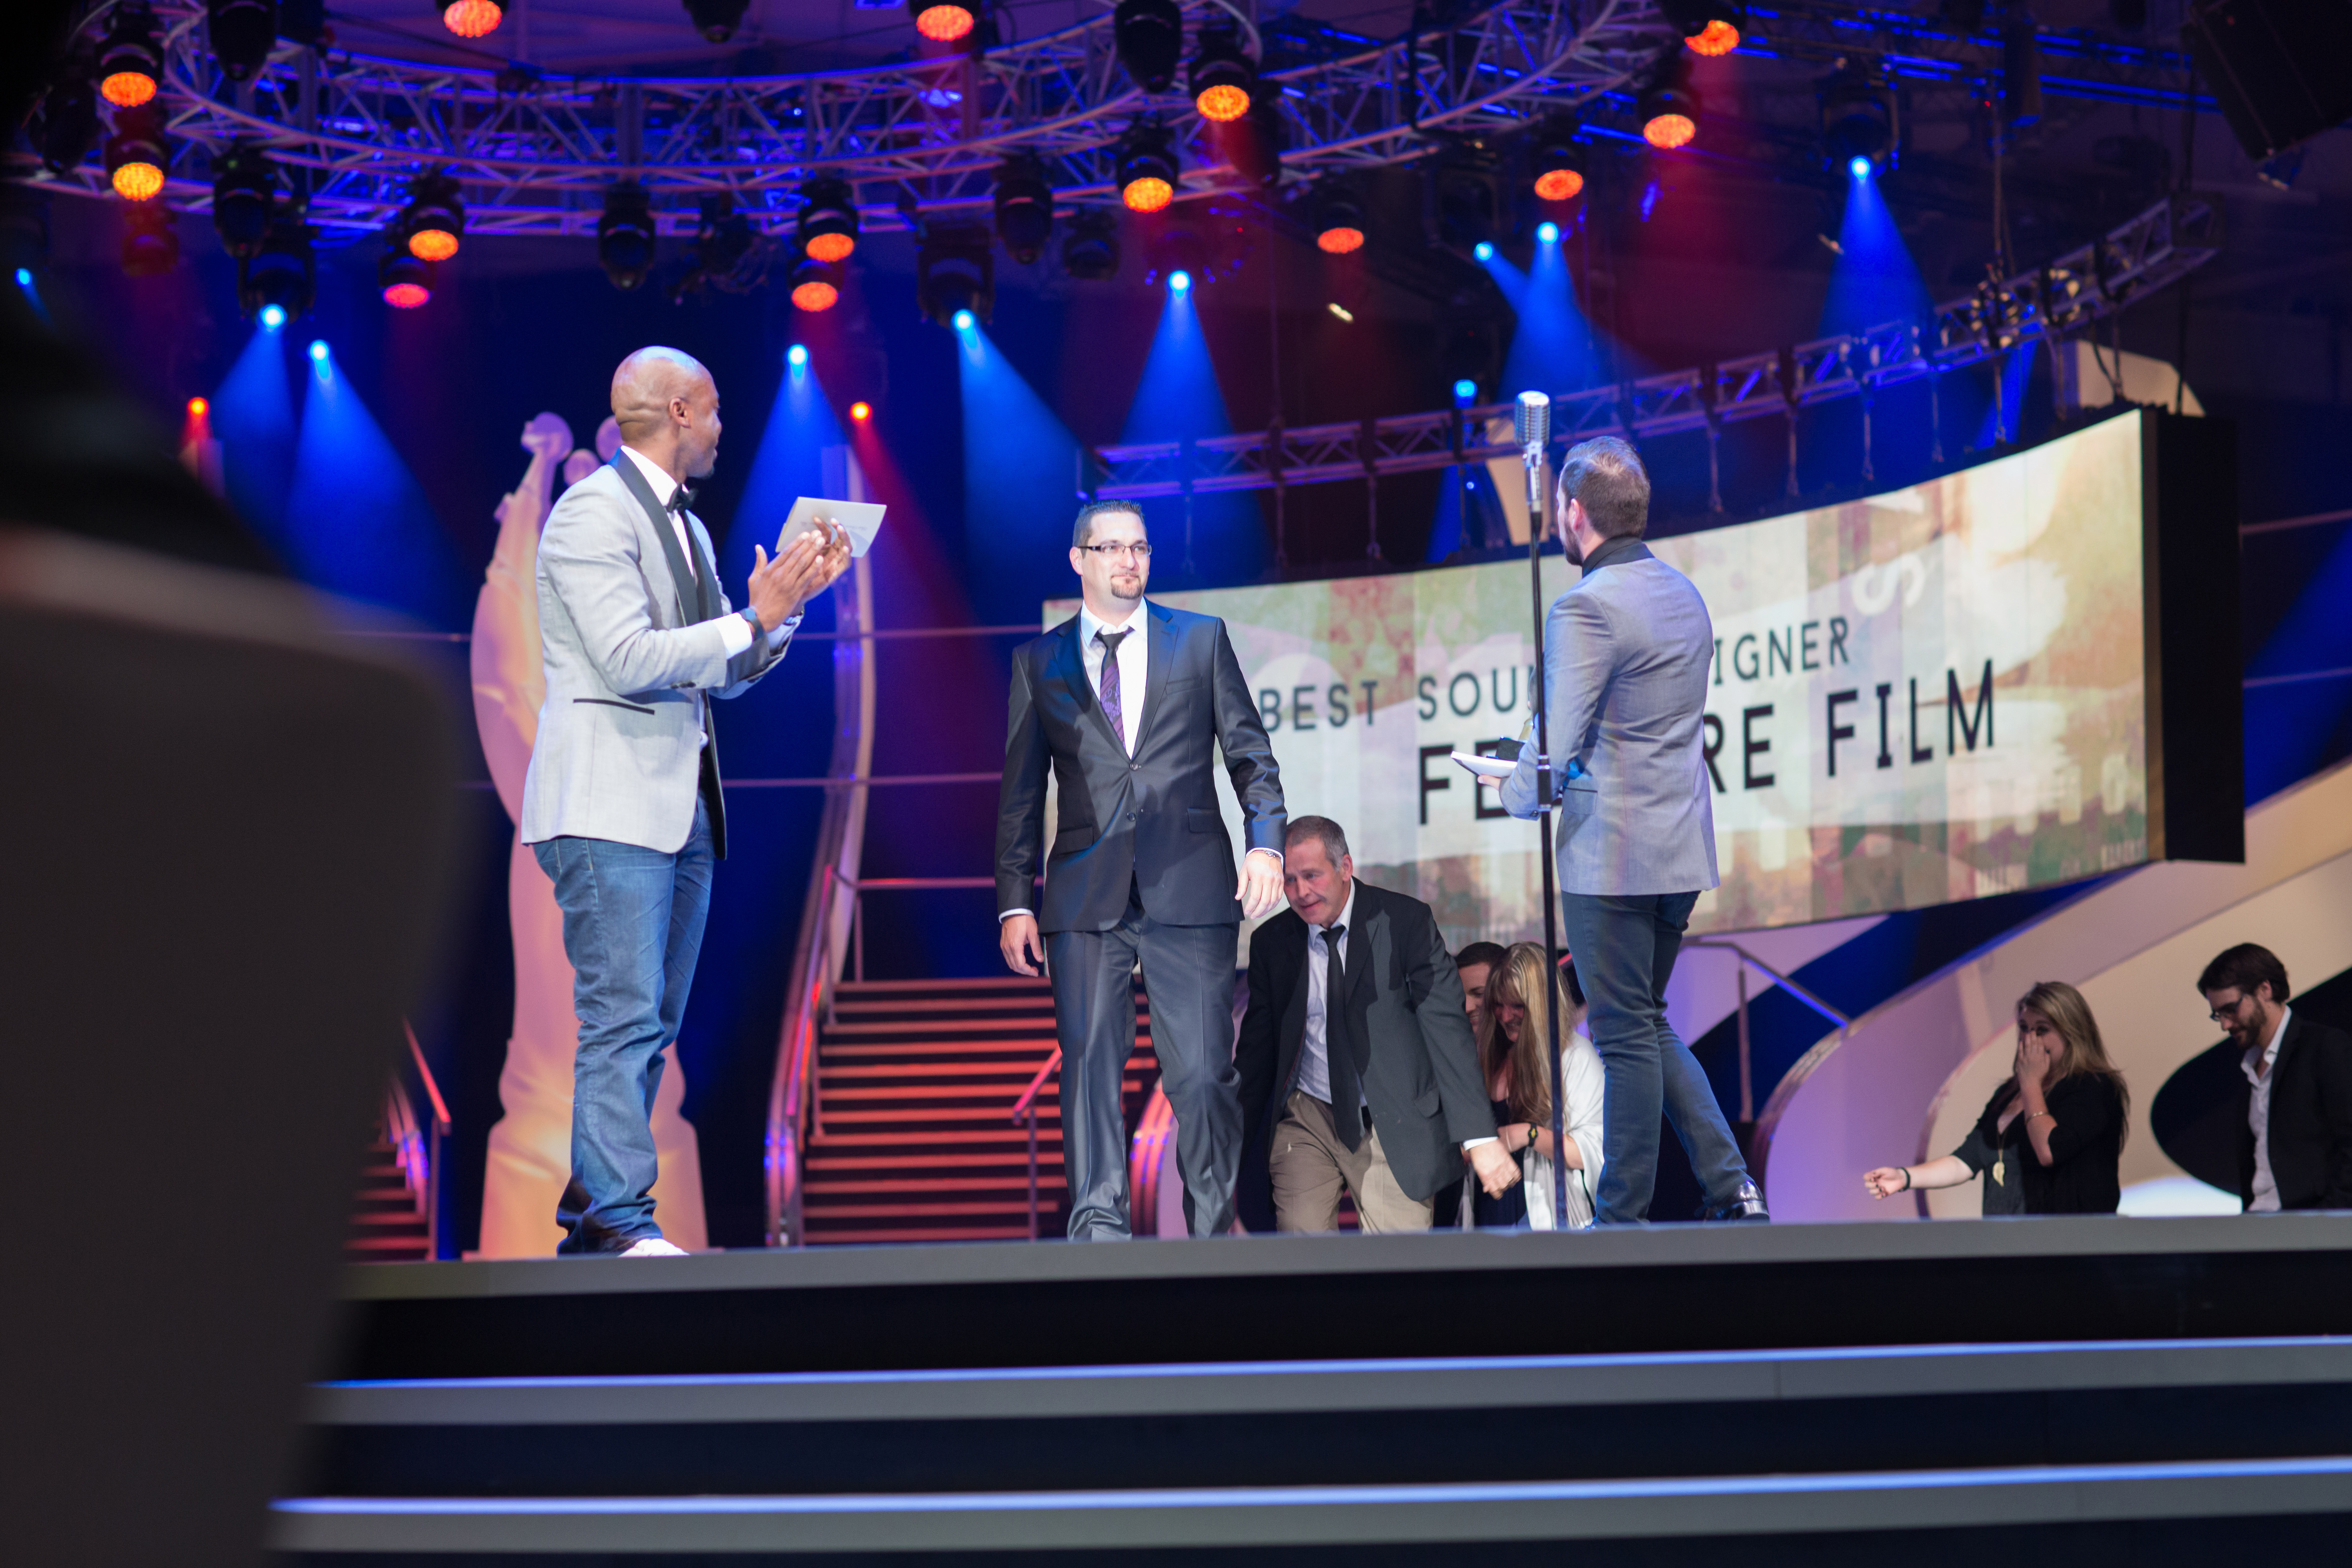 Jim Petrak at the South African Film and Television Awards 2014